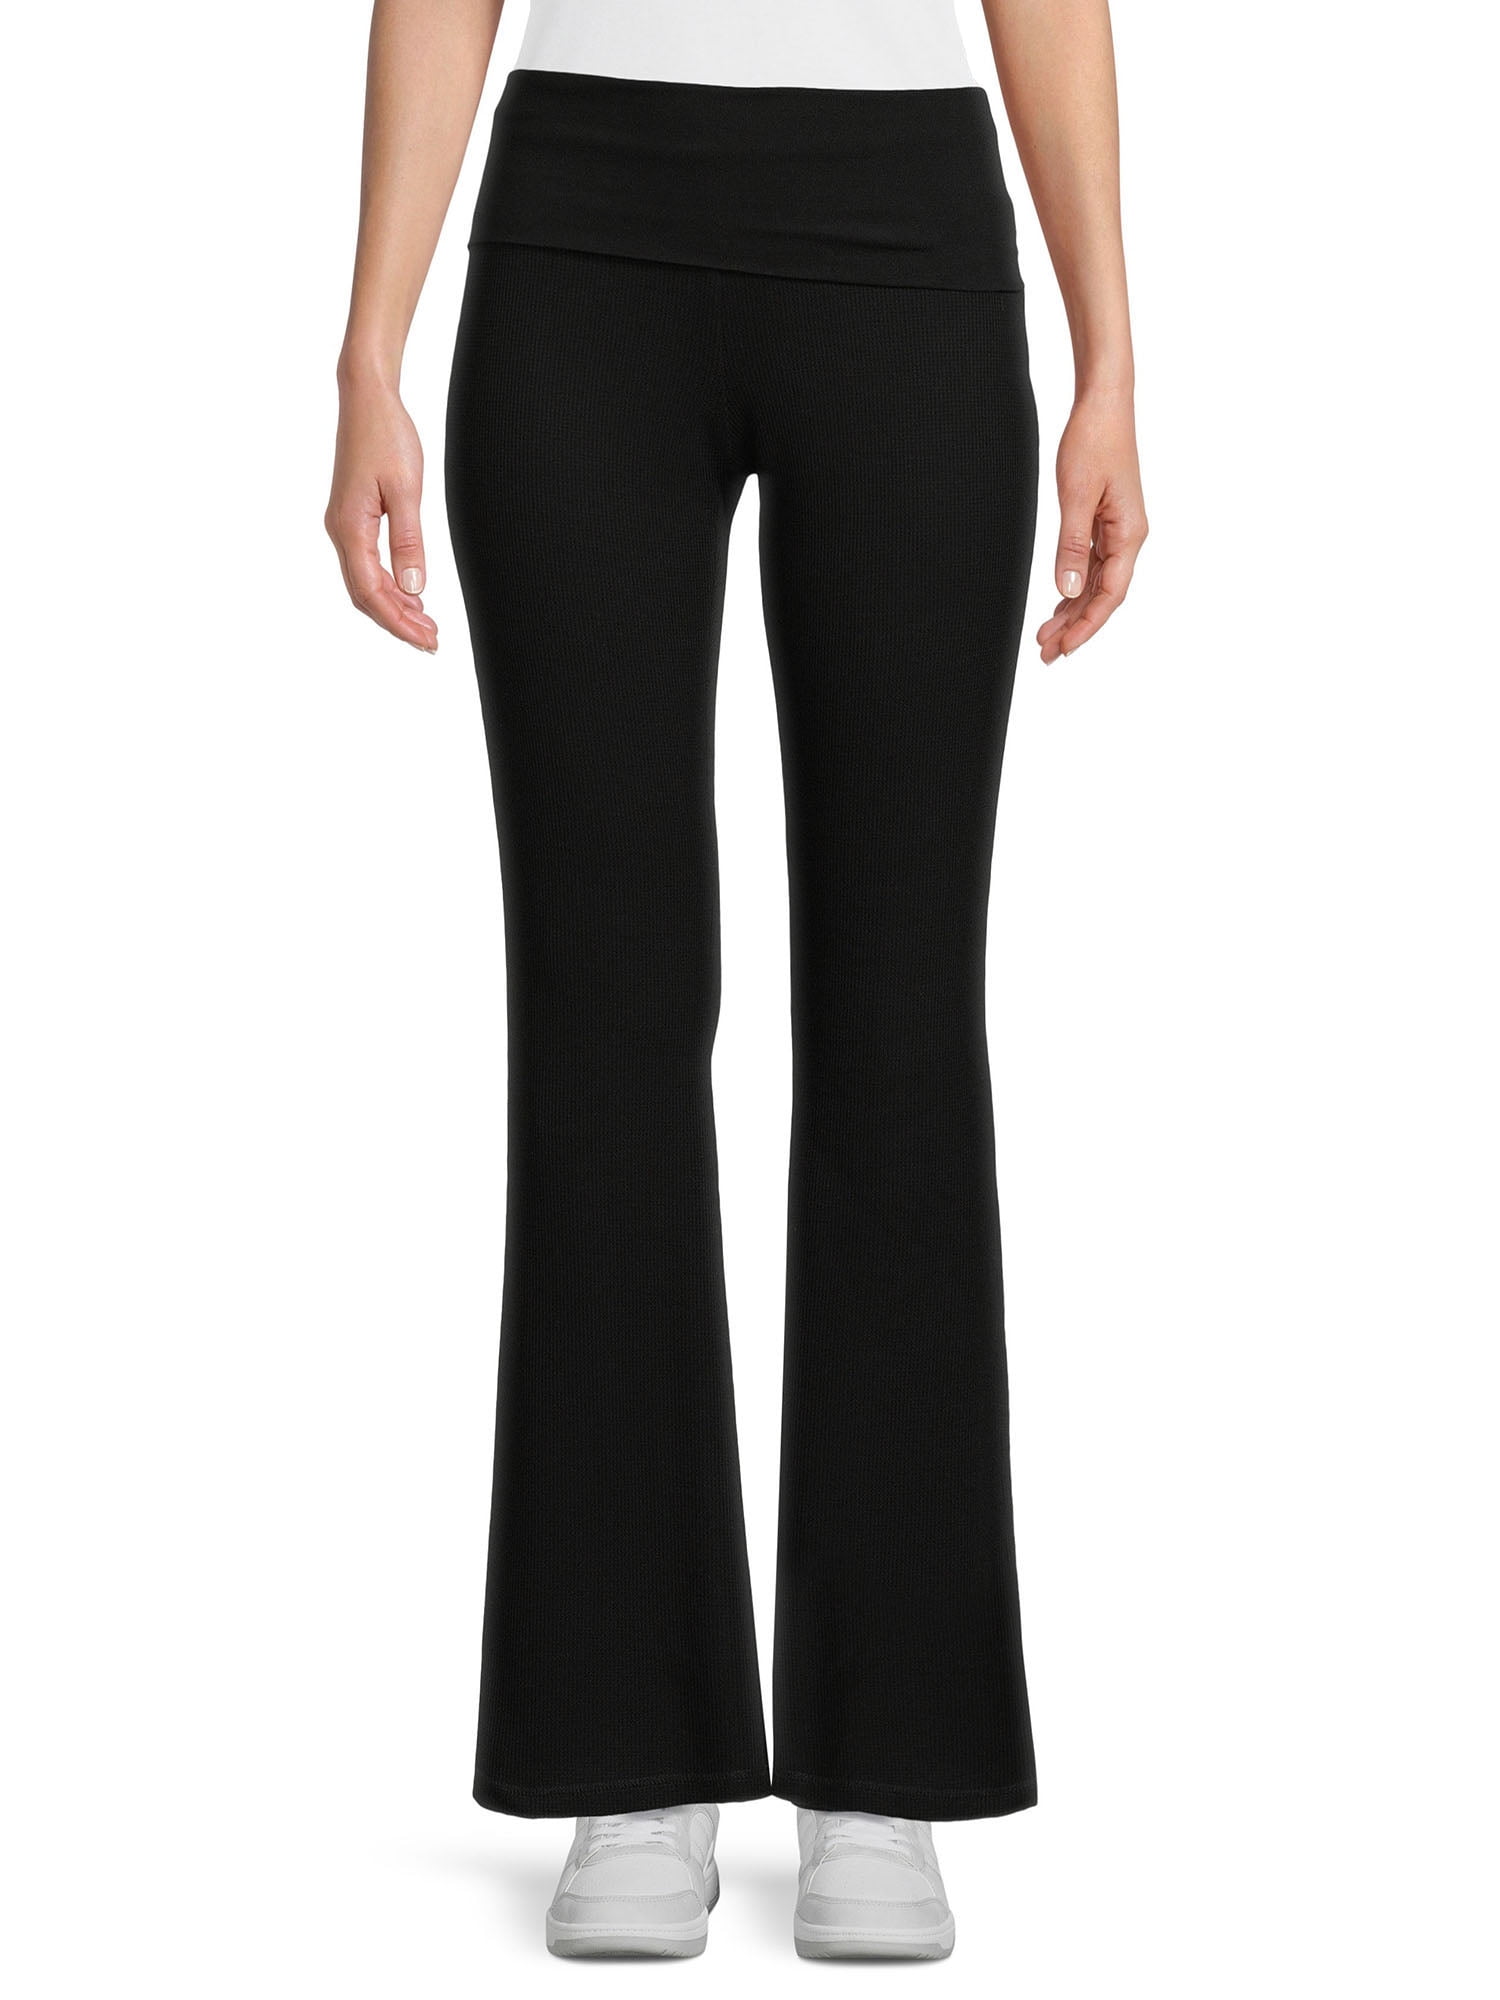 VSPINK cotton foldover flare leggings!! THANK ME LATER. size xs, shor, Fold  Over Flare Pants